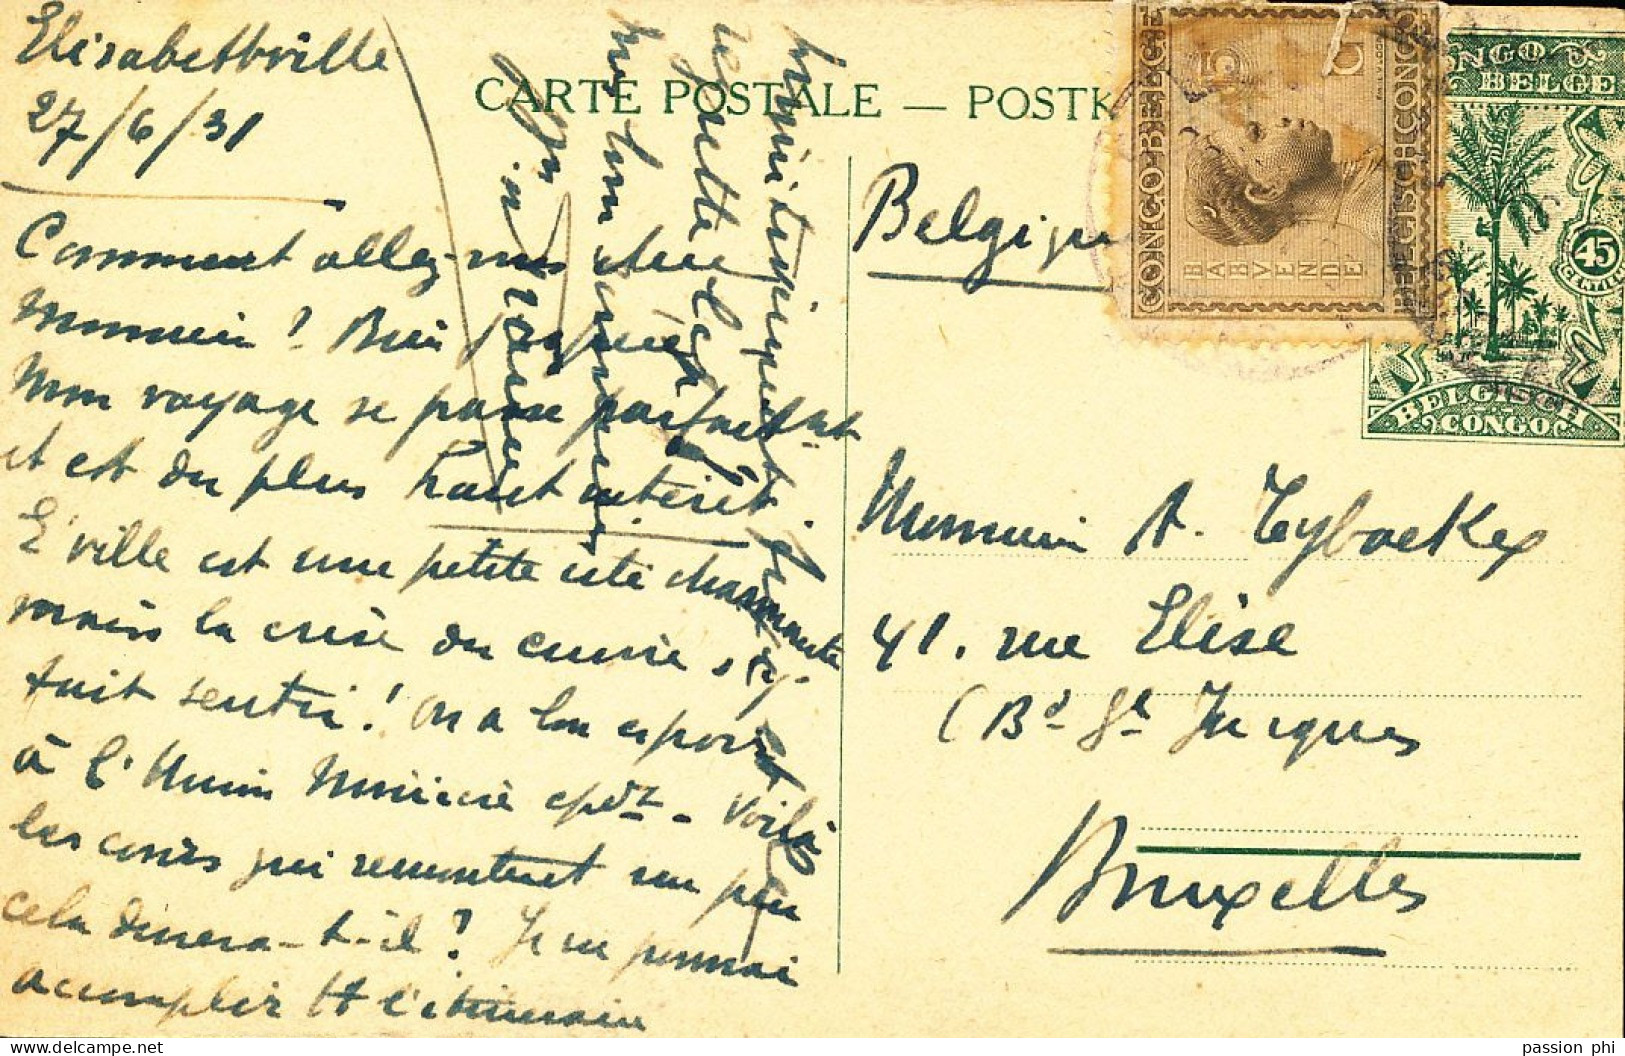 TT BELGIAN CONGO 1927 ISSUE SBEP 66 VIEW 24 USED CURIOSITY BAD CUT STAMP AN VIEW MISPLACED - Stamped Stationery